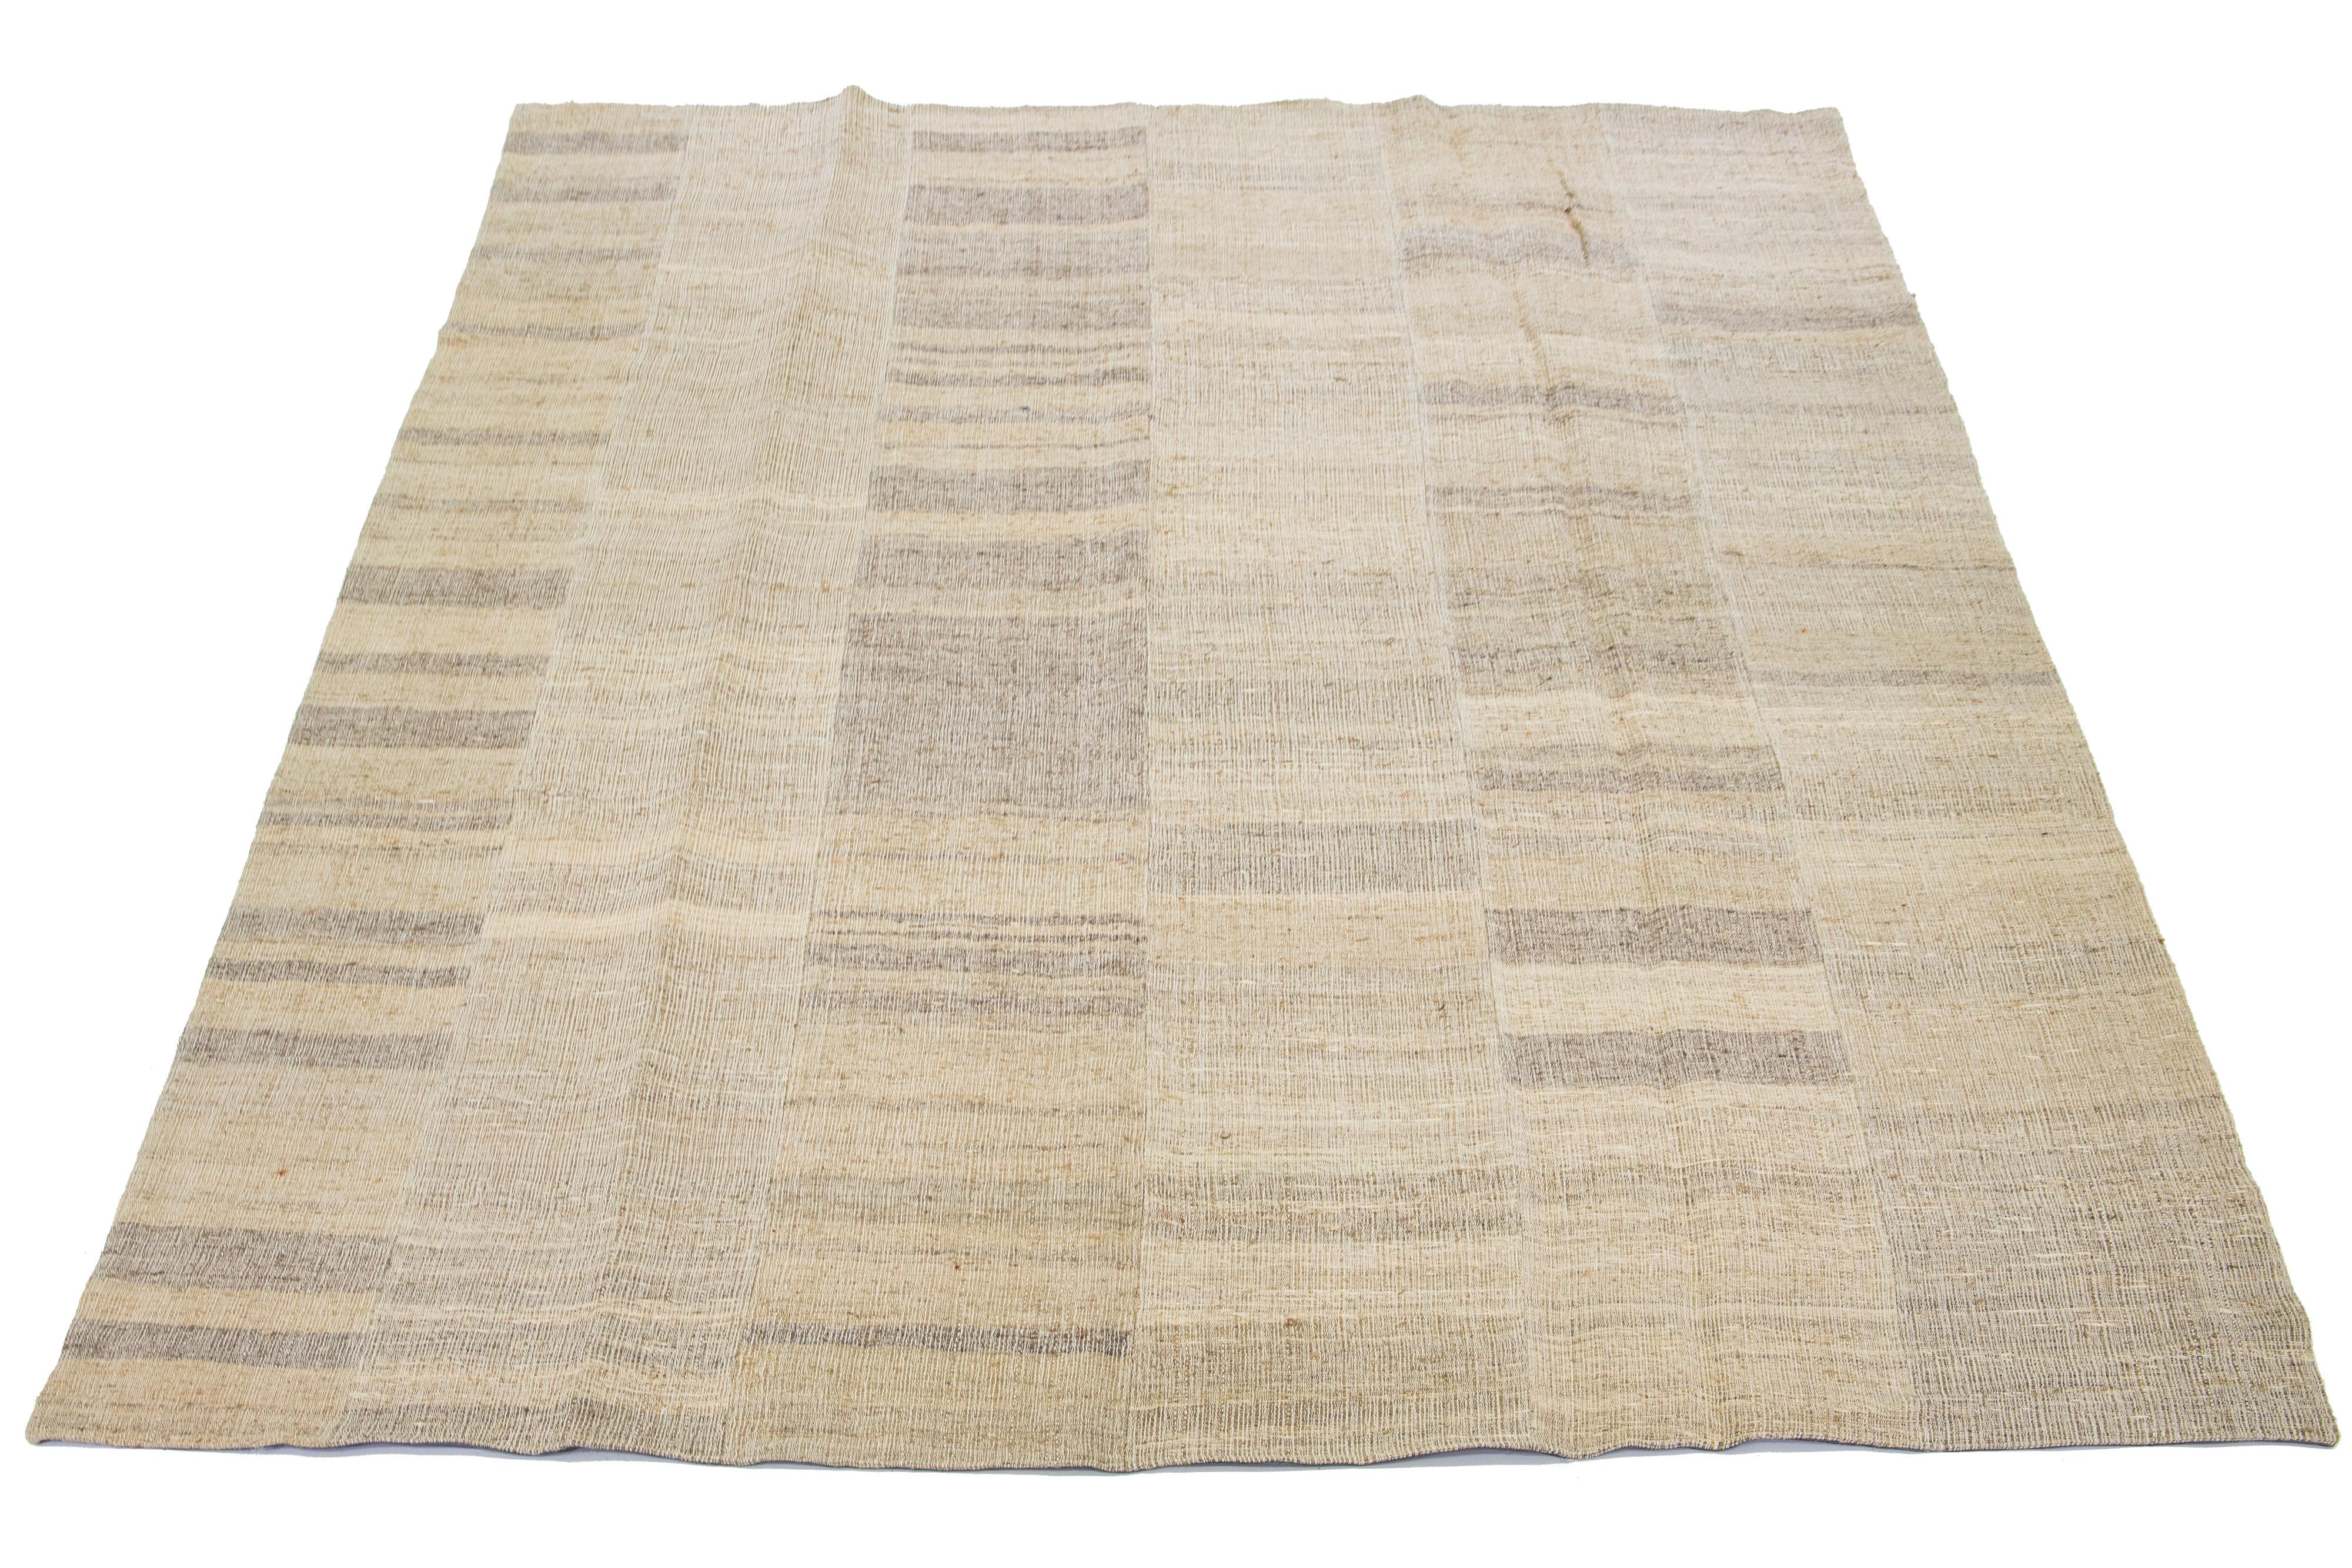 This Indian rug showcases a contemporary Kilim flatweave style crafted from wool. The rug has a beige field with a striped pattern in brown shades.

This rug measures 9'11